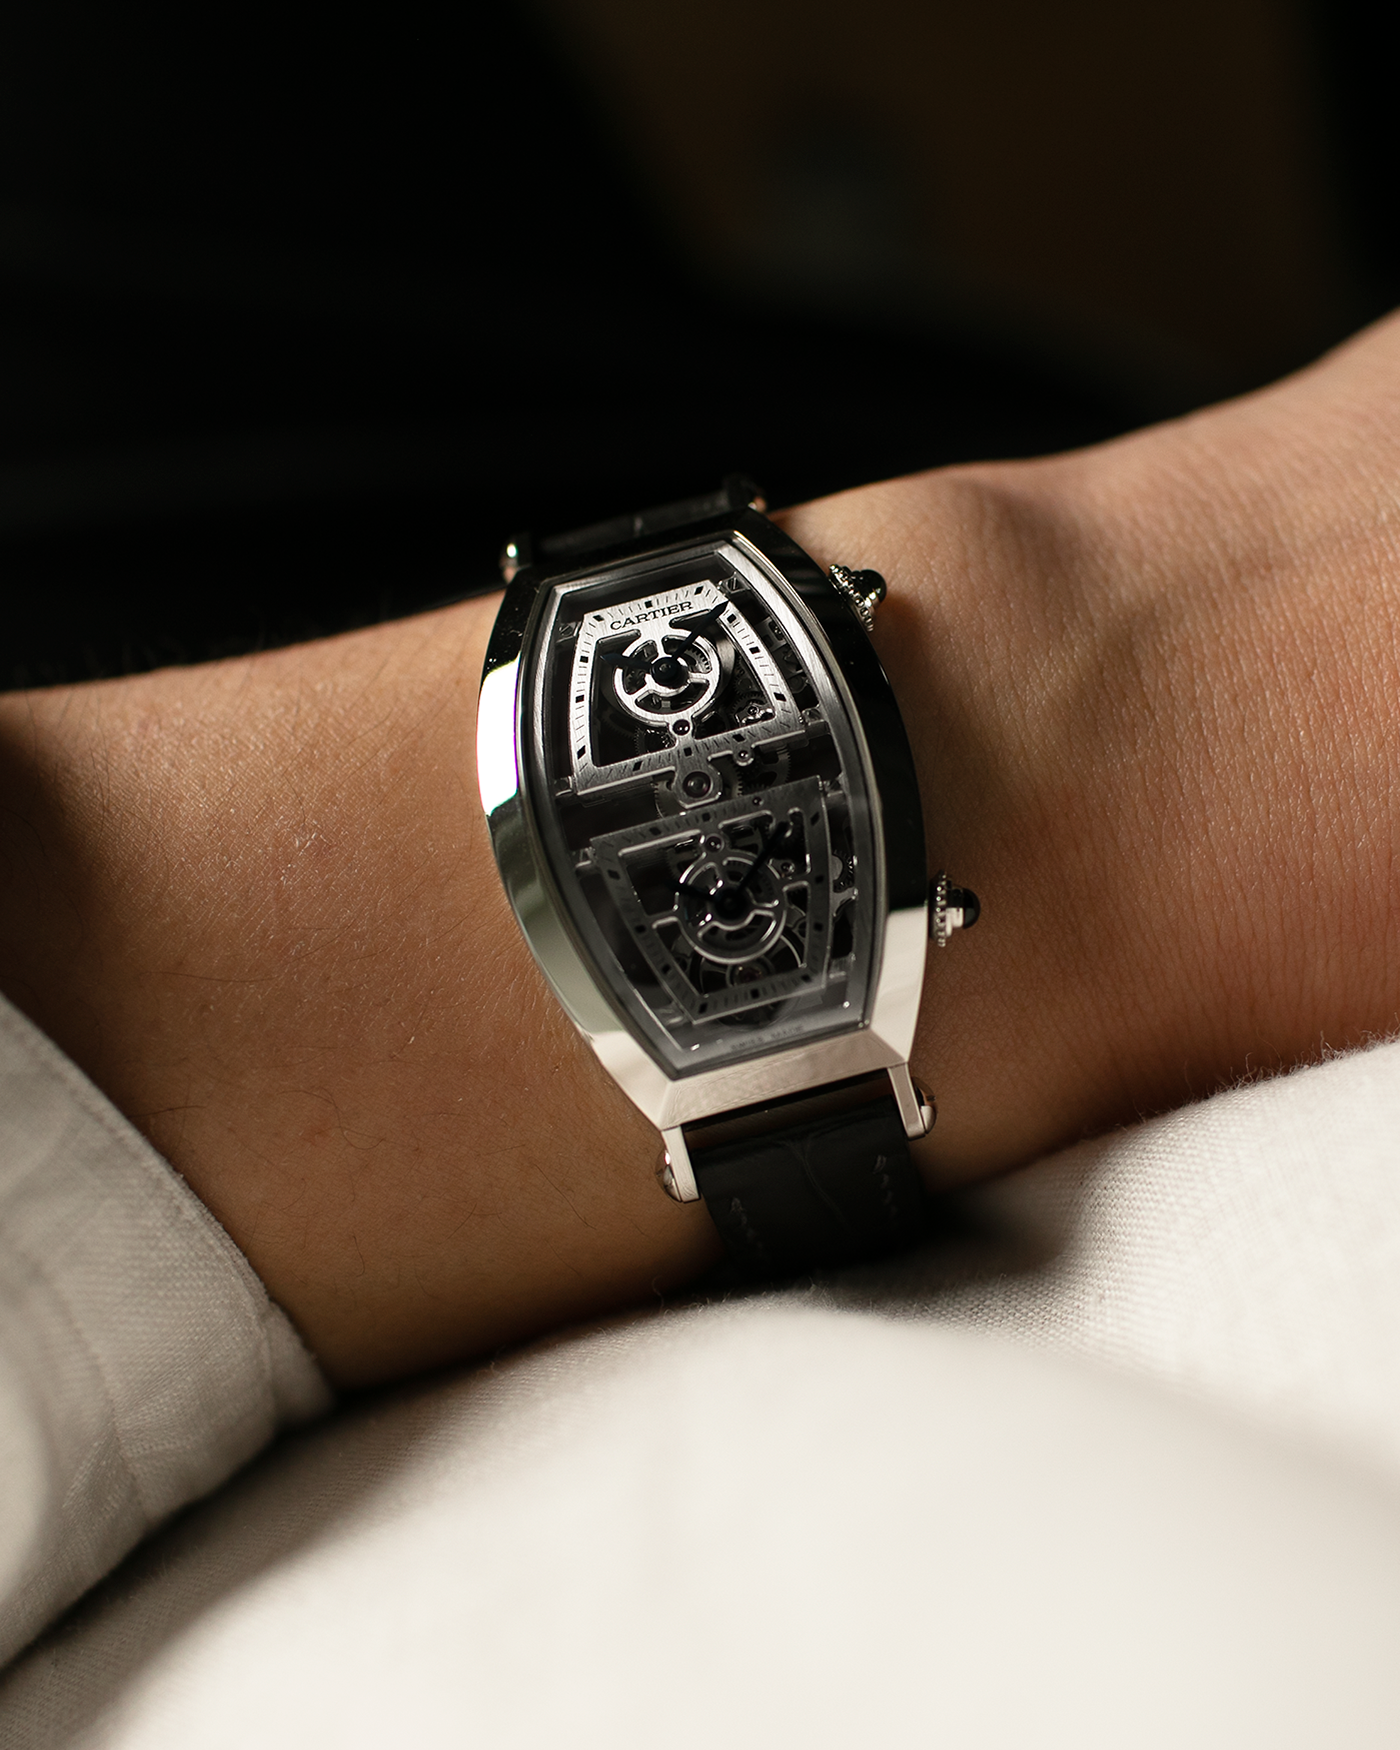 Brand: Cartier Year: 2022 Model: Privé Tonneau Skeleton Dual Time, Limited Edition of 100 pieces only Reference: CRWHTN0006 Material: Platinum 950 Case, 18-carat White Gold Deployant Clasp Movement: Cartier Cal. 9919 MC, Manual-Winding Case Dimensions: 52.4mm x 29.4mm Strap: Cartier Navy Alligator Leather Strap with Signed 18-carat White Gold Deployant Clasp, with two additional Cartier Black and Blue Alligator Leather Straps